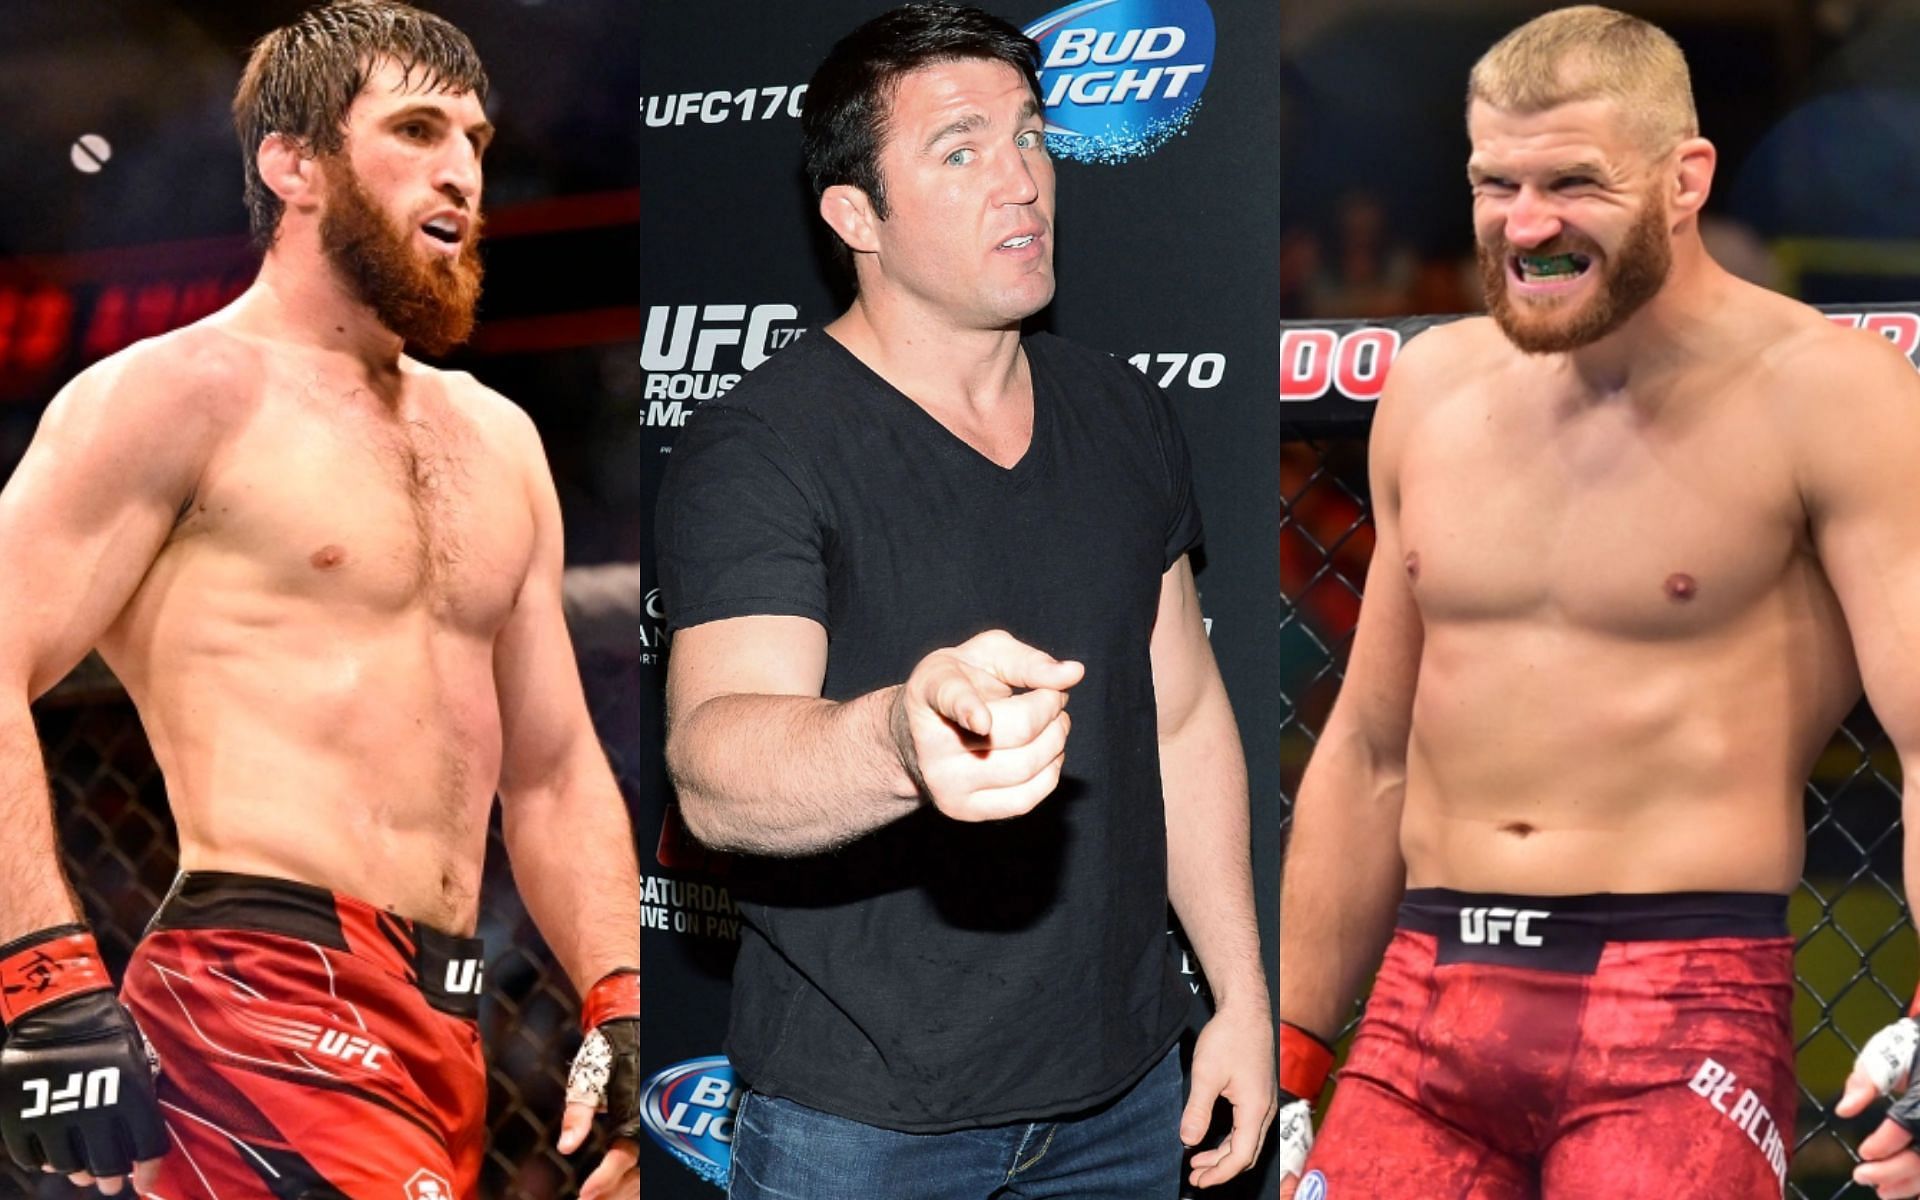 From left to right: Magomed Ankalaev, Chael Sonnen, and Jan Blachowicz [Image credits: Jerome Miron /USA TODAY Sports, Getty Images, and MMA Junkie)